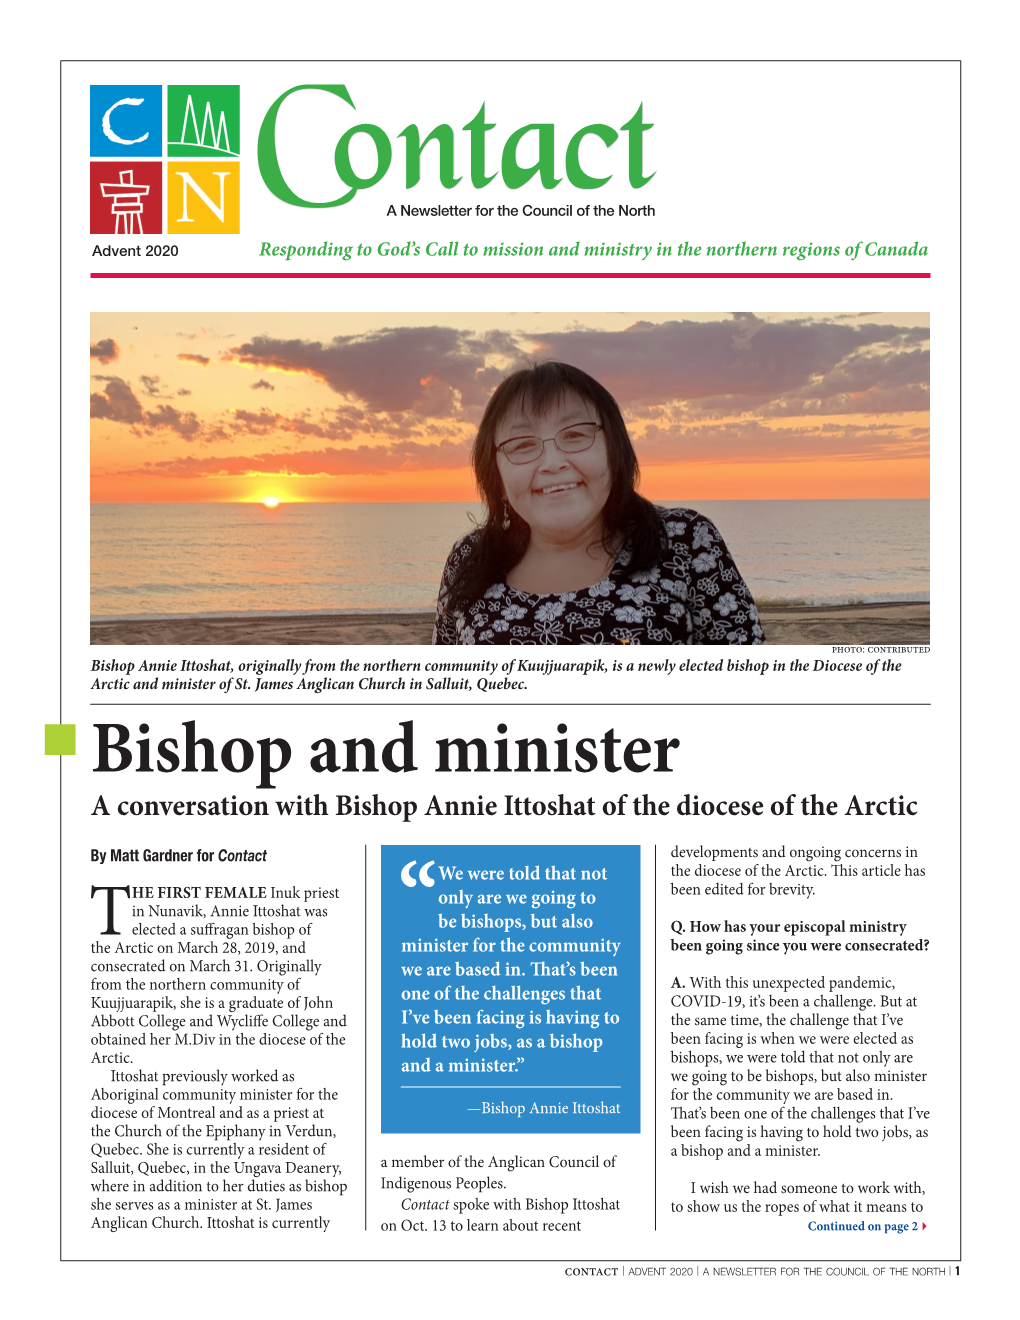 Bishop and Minister a Conversation with Bishop Annie Ittoshat of the Diocese of the Arctic